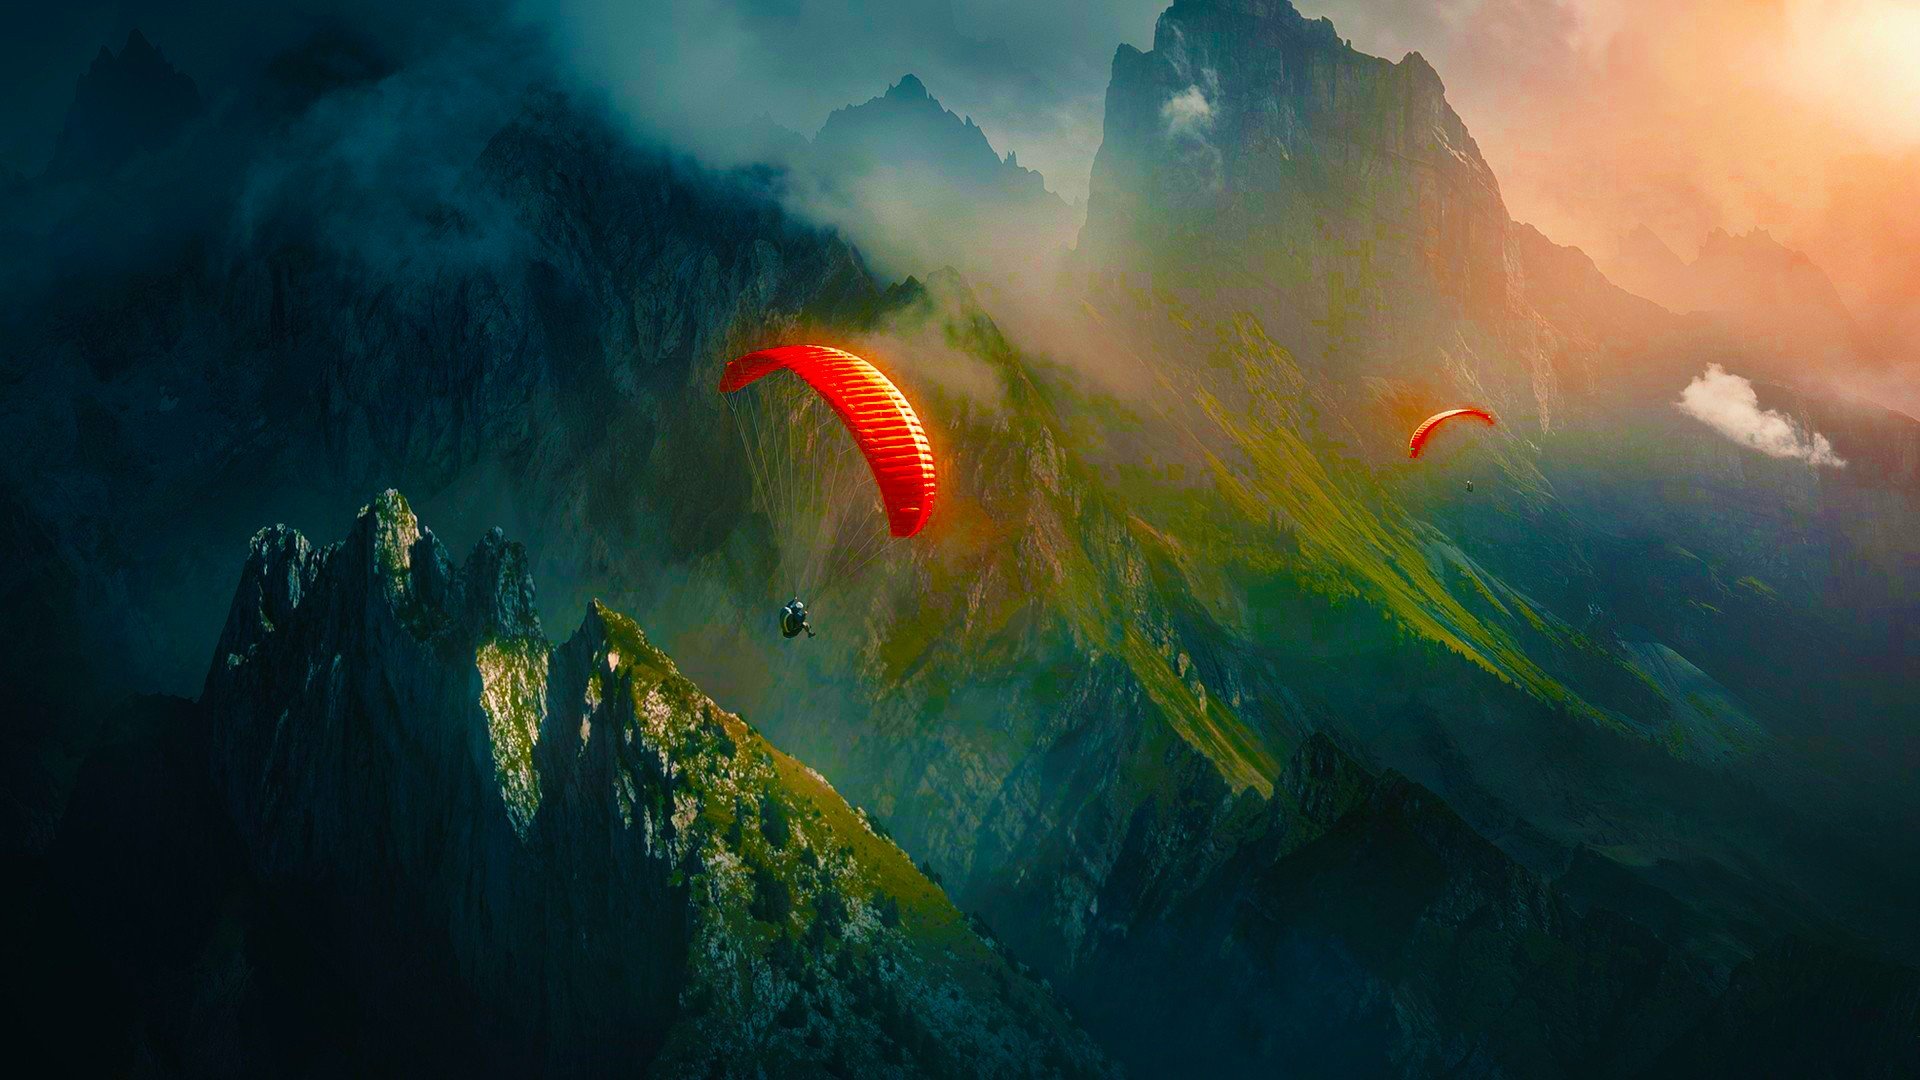 60+ Skydiving HD Wallpapers and Backgrounds